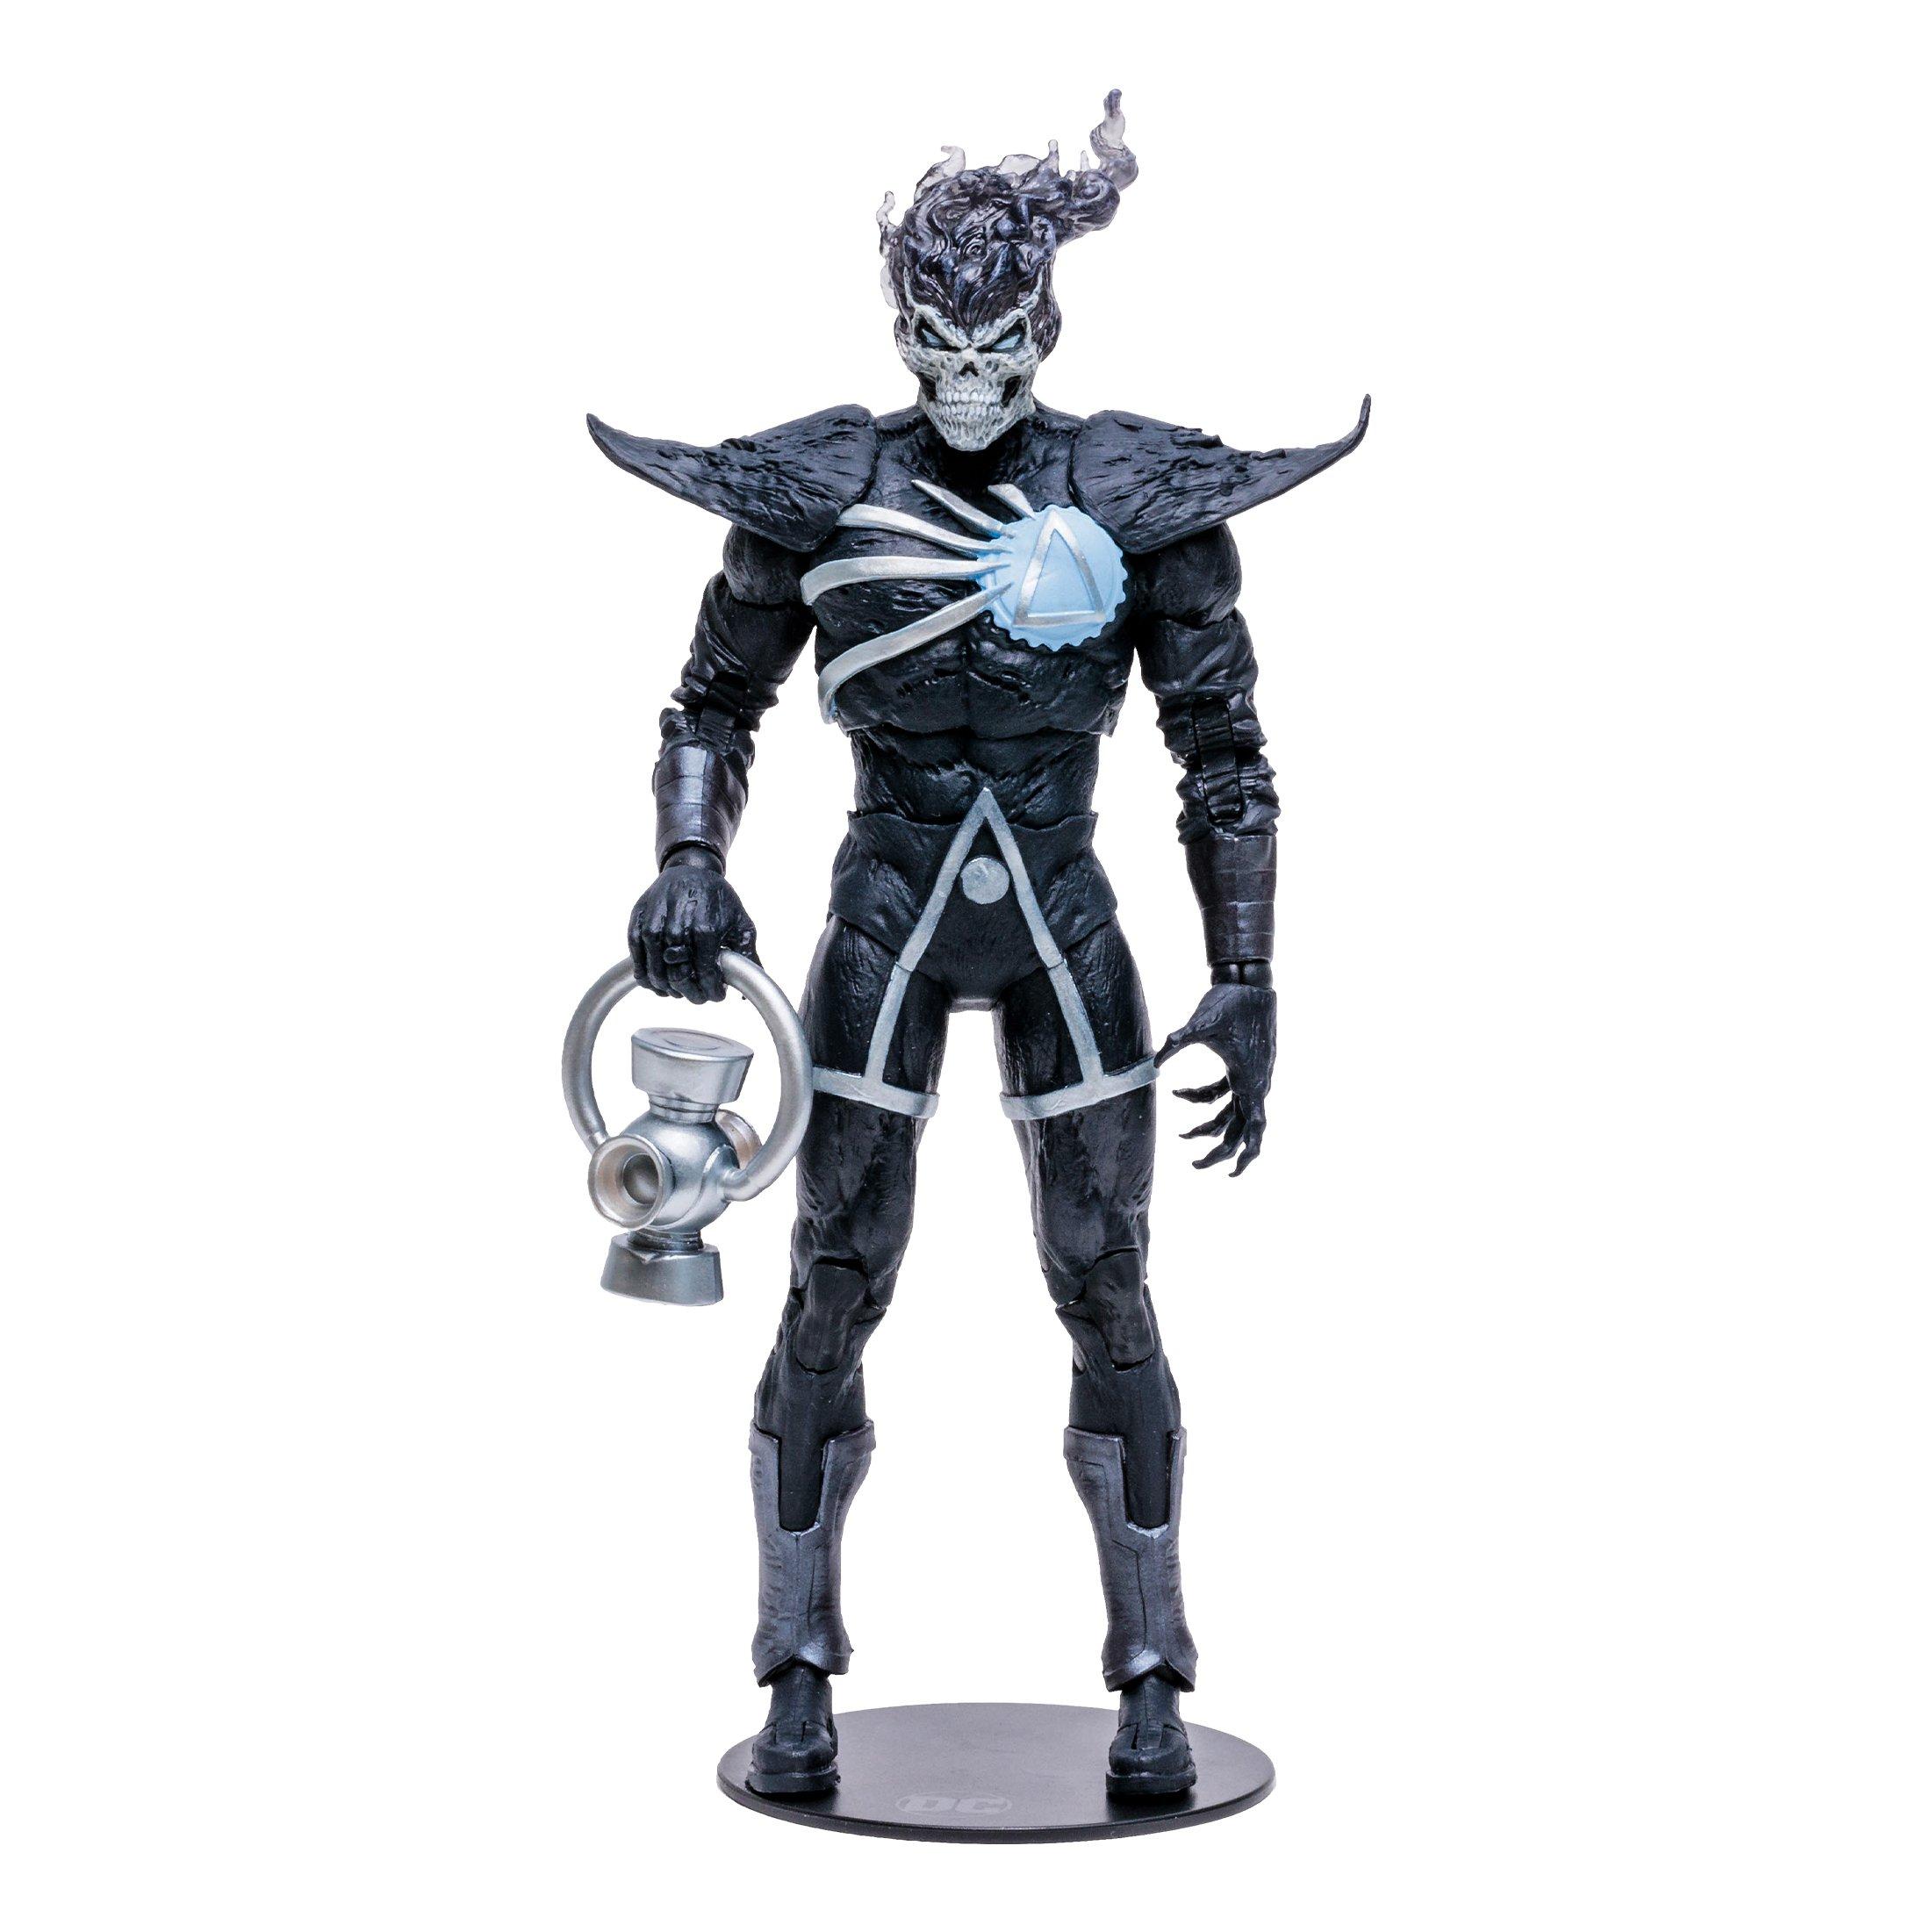 McFarlane Toys DC Multiverse Blackest Night Deathstorm Collect to Build 7-in Action Figure (GameStop)